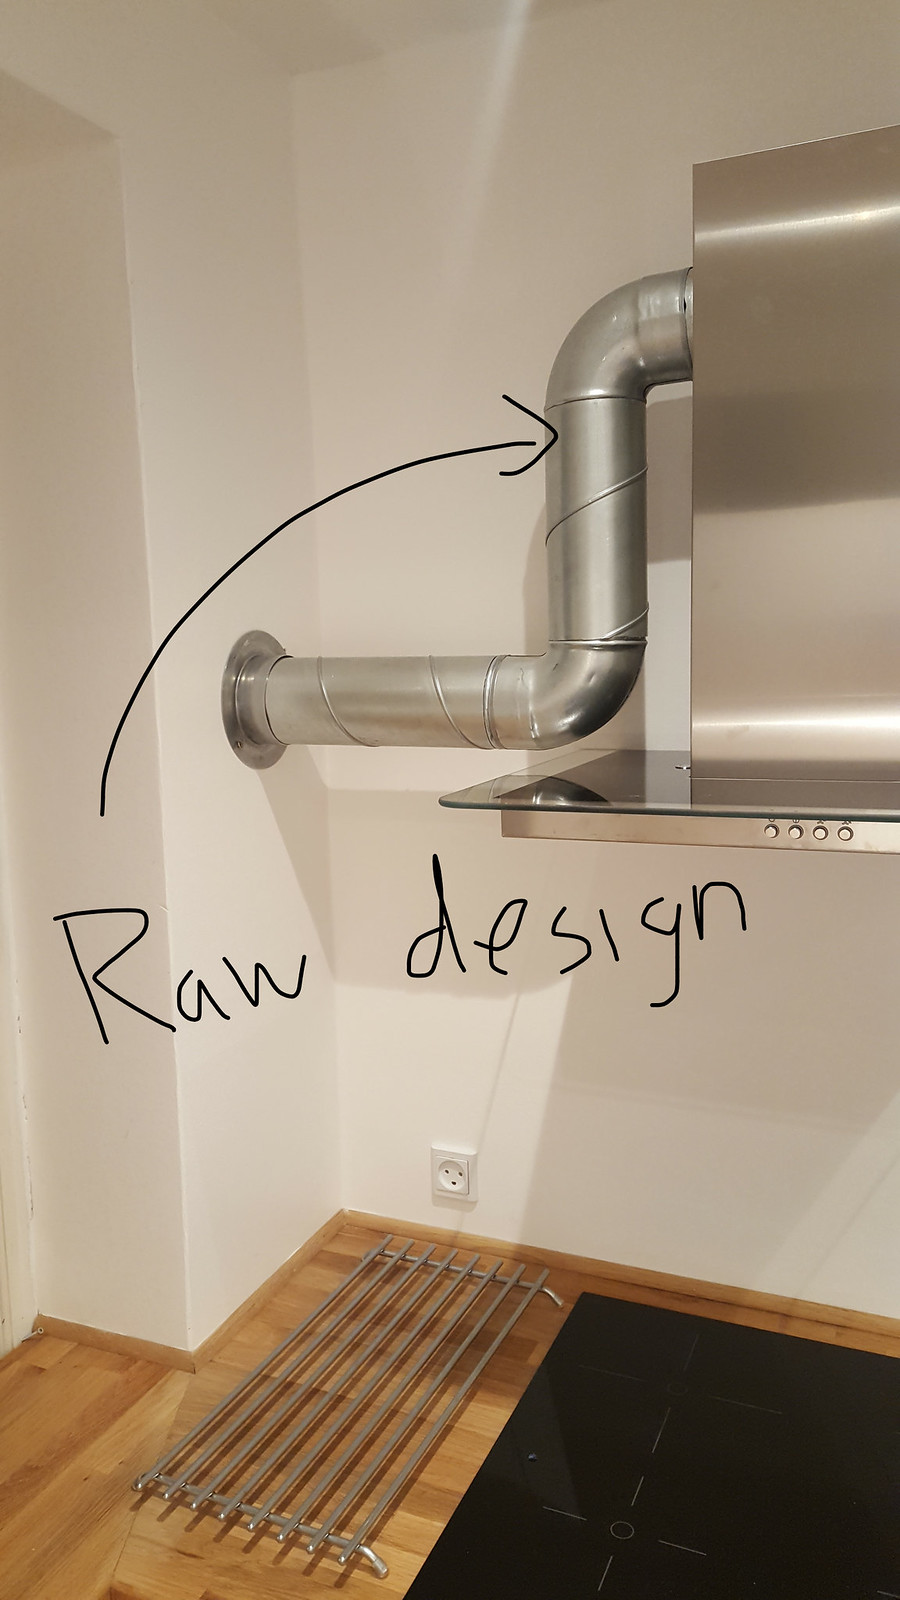 How-to-guide Installation of IKEA kitchen